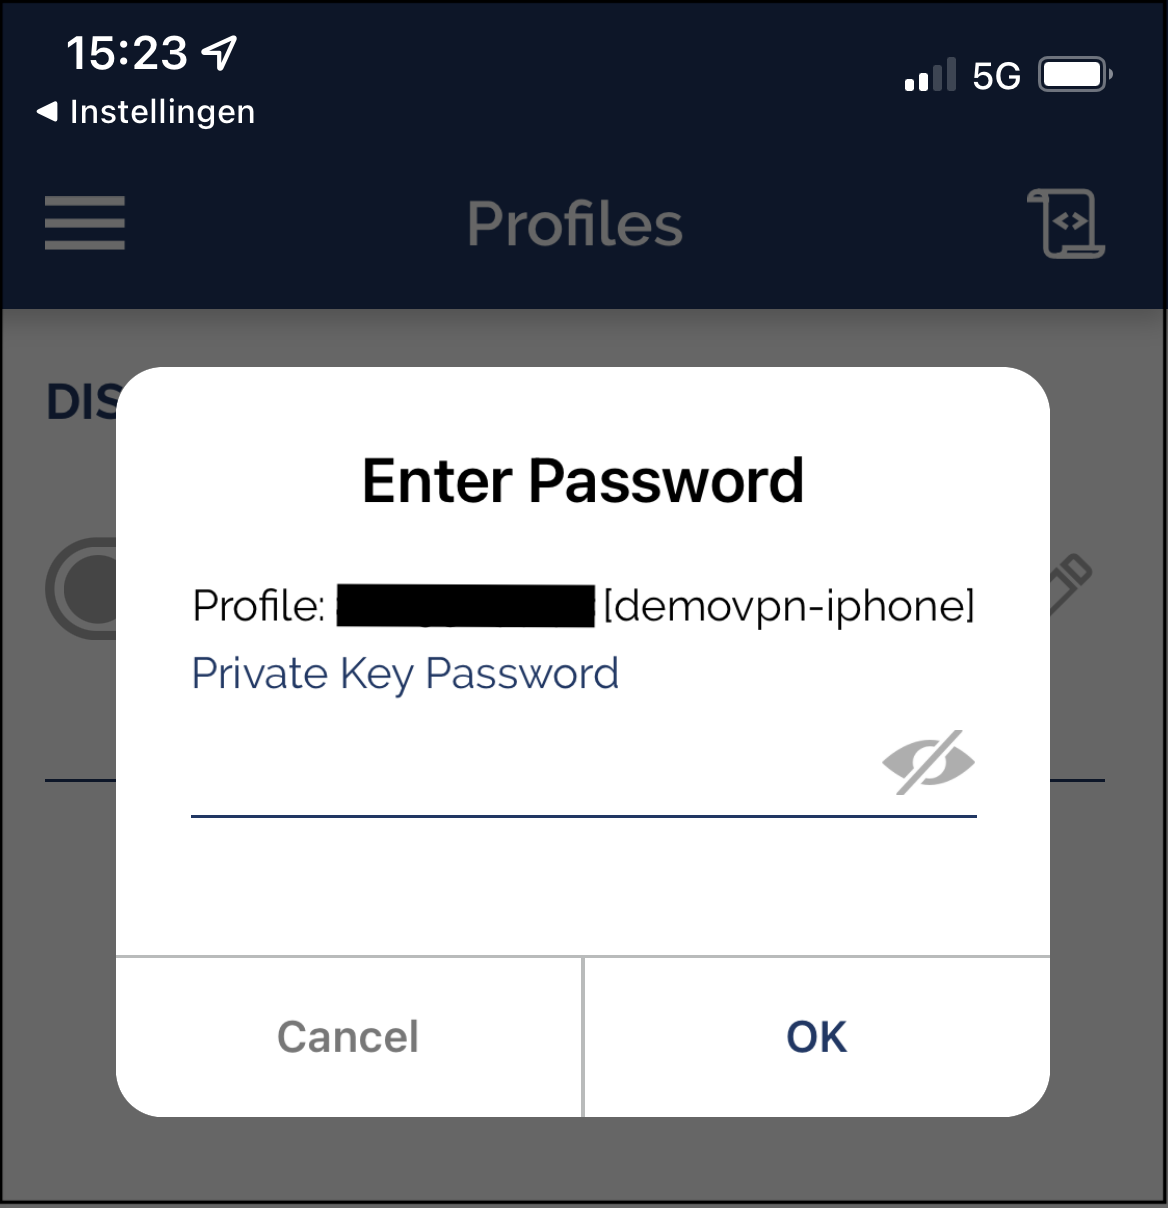 Connect, and enter passphrase